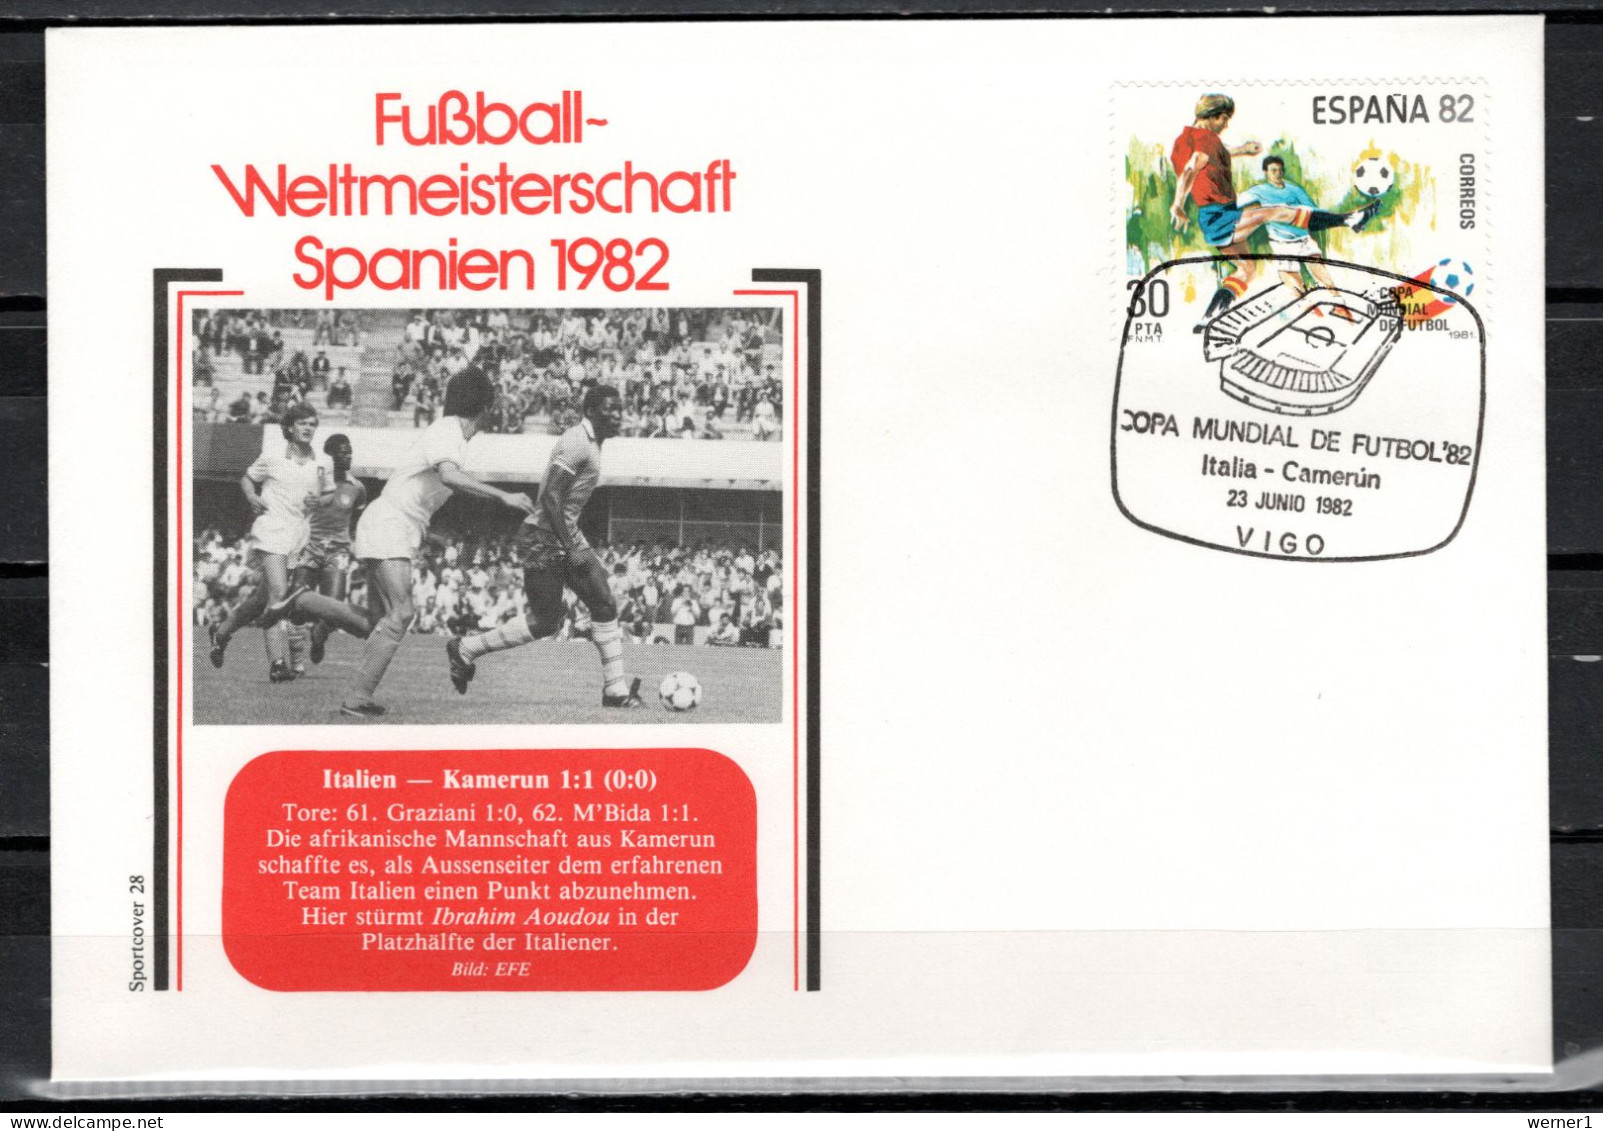 Spain 1982 Football Soccer World Cup Commemorative Cover Match Italy - Cameroon 1:1 - 1982 – Spain